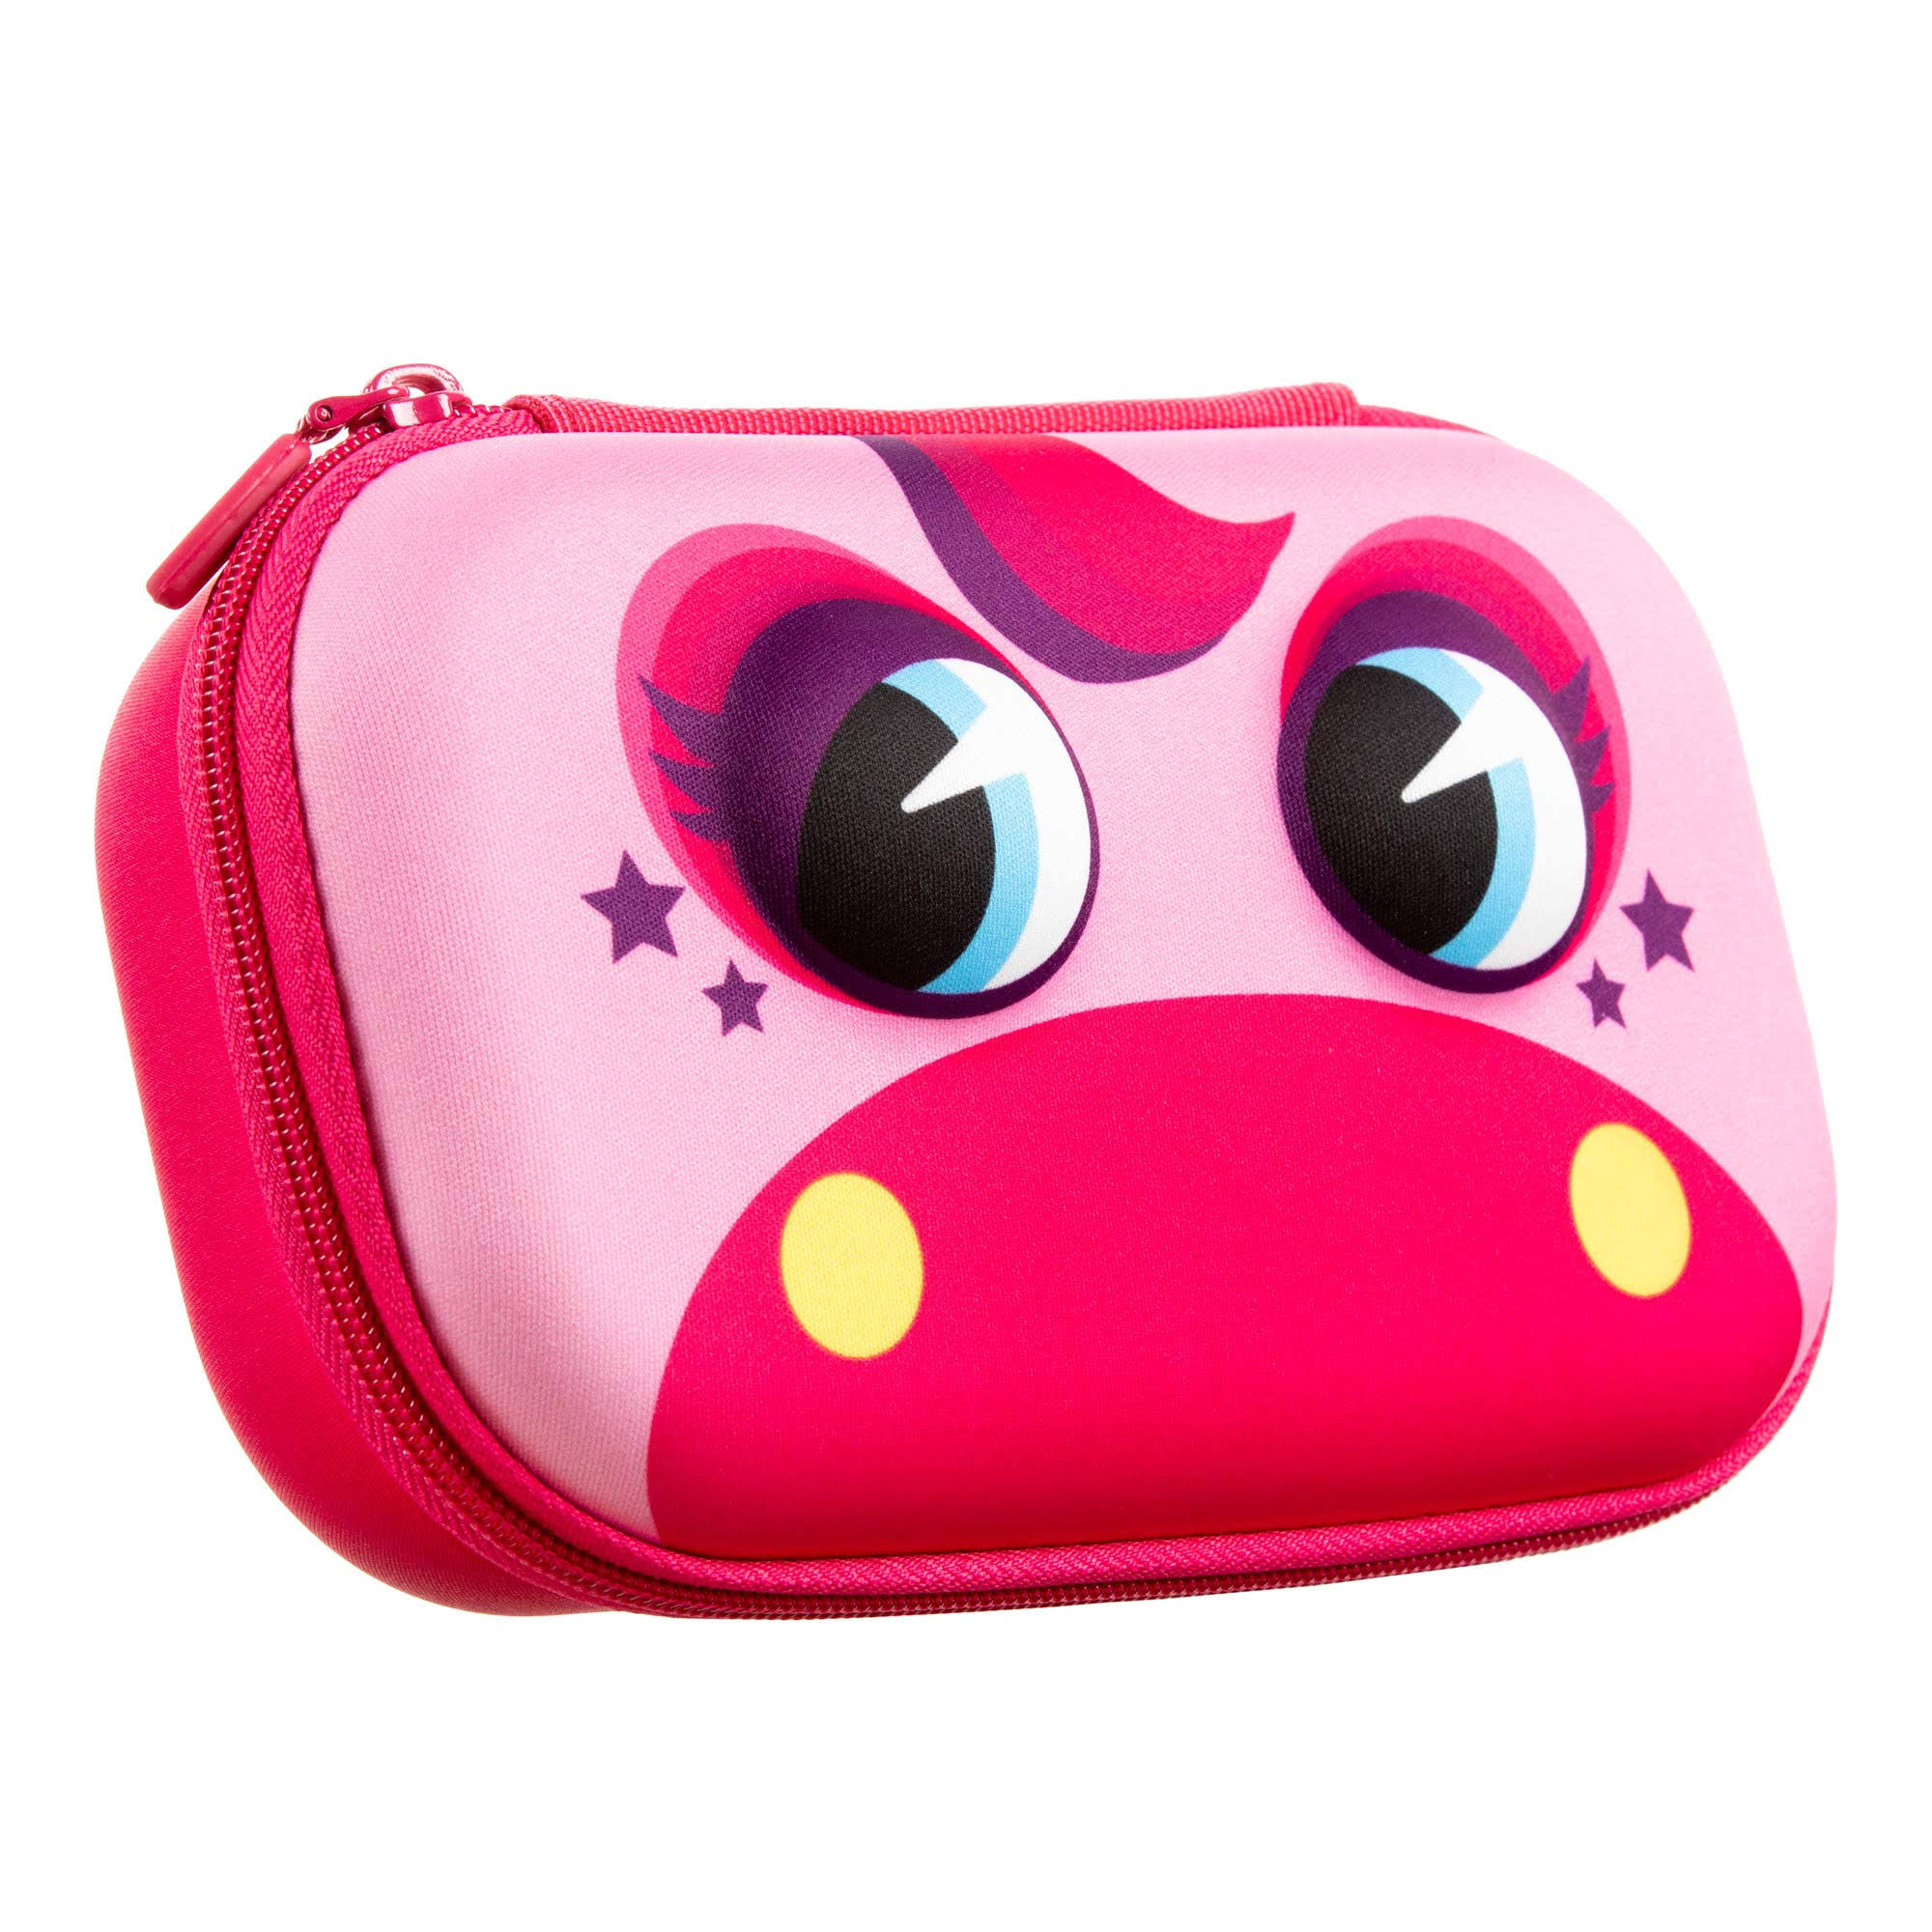 Zipit Beast - Pony Pencil Box for Kids, Cute Storage Case for School Supplies, Secure Zipper Closure (Pony)